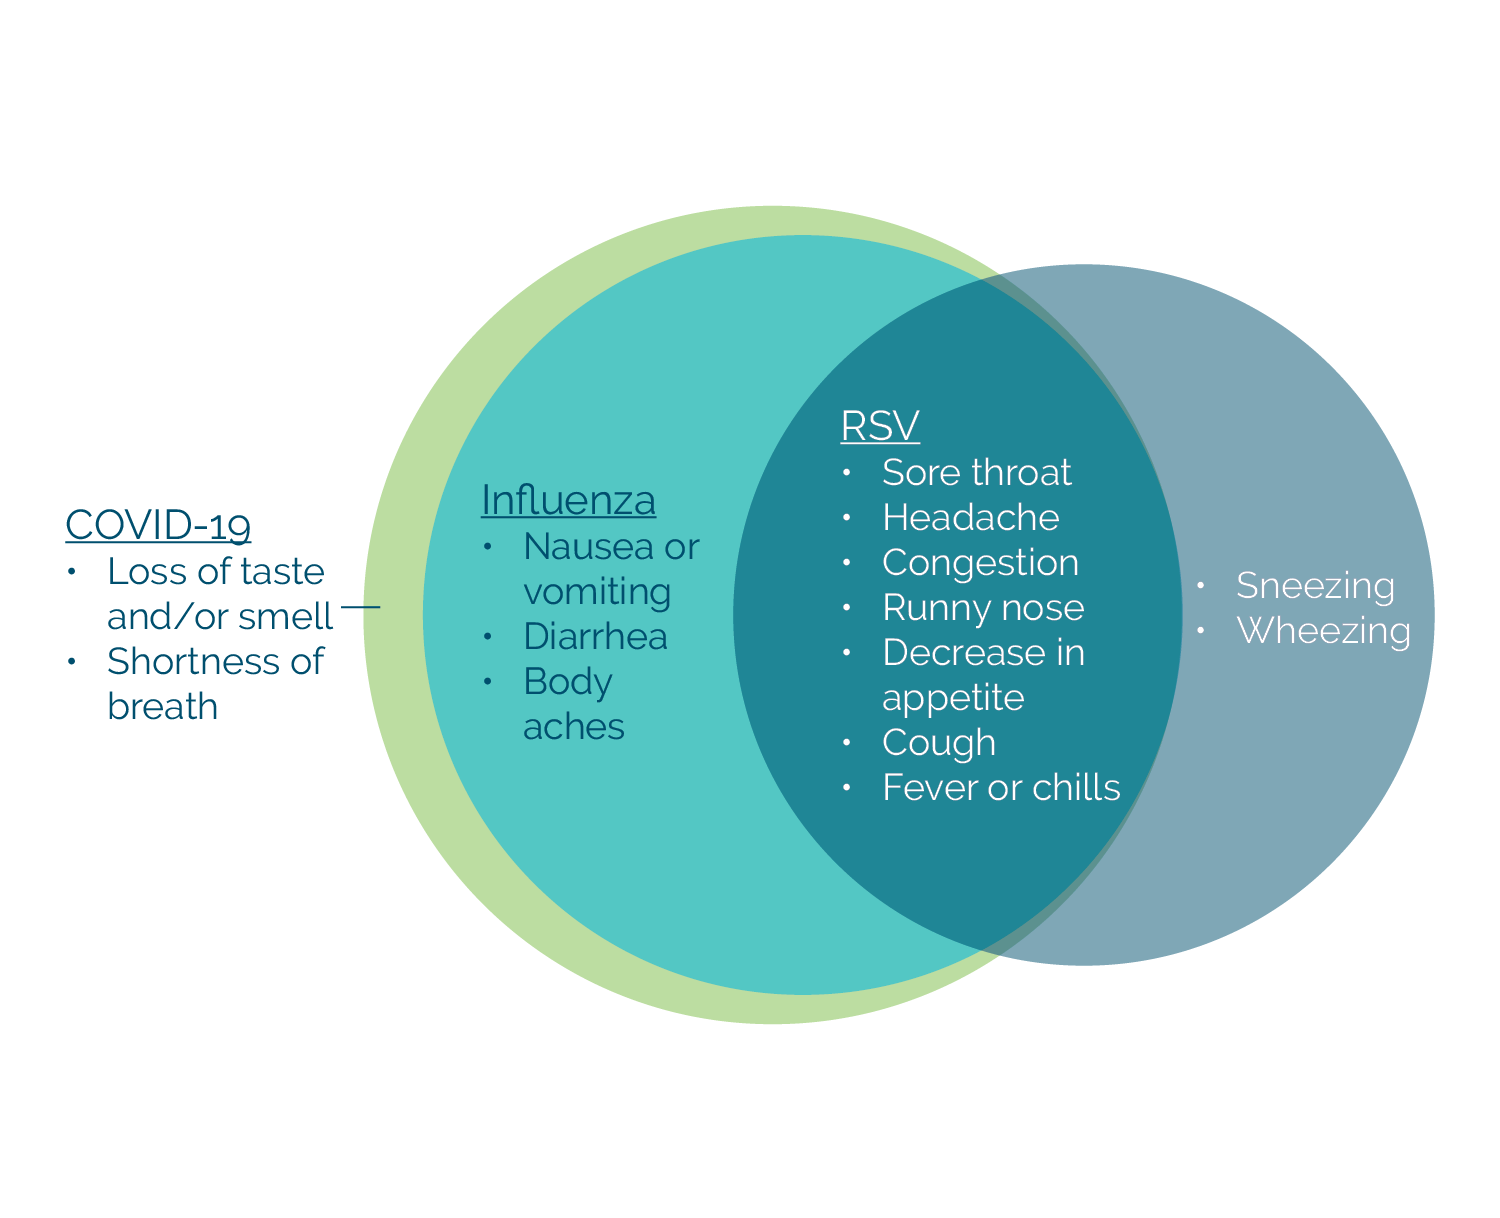 COVID-19, Influenza, and RSV share many overlapping symptoms.